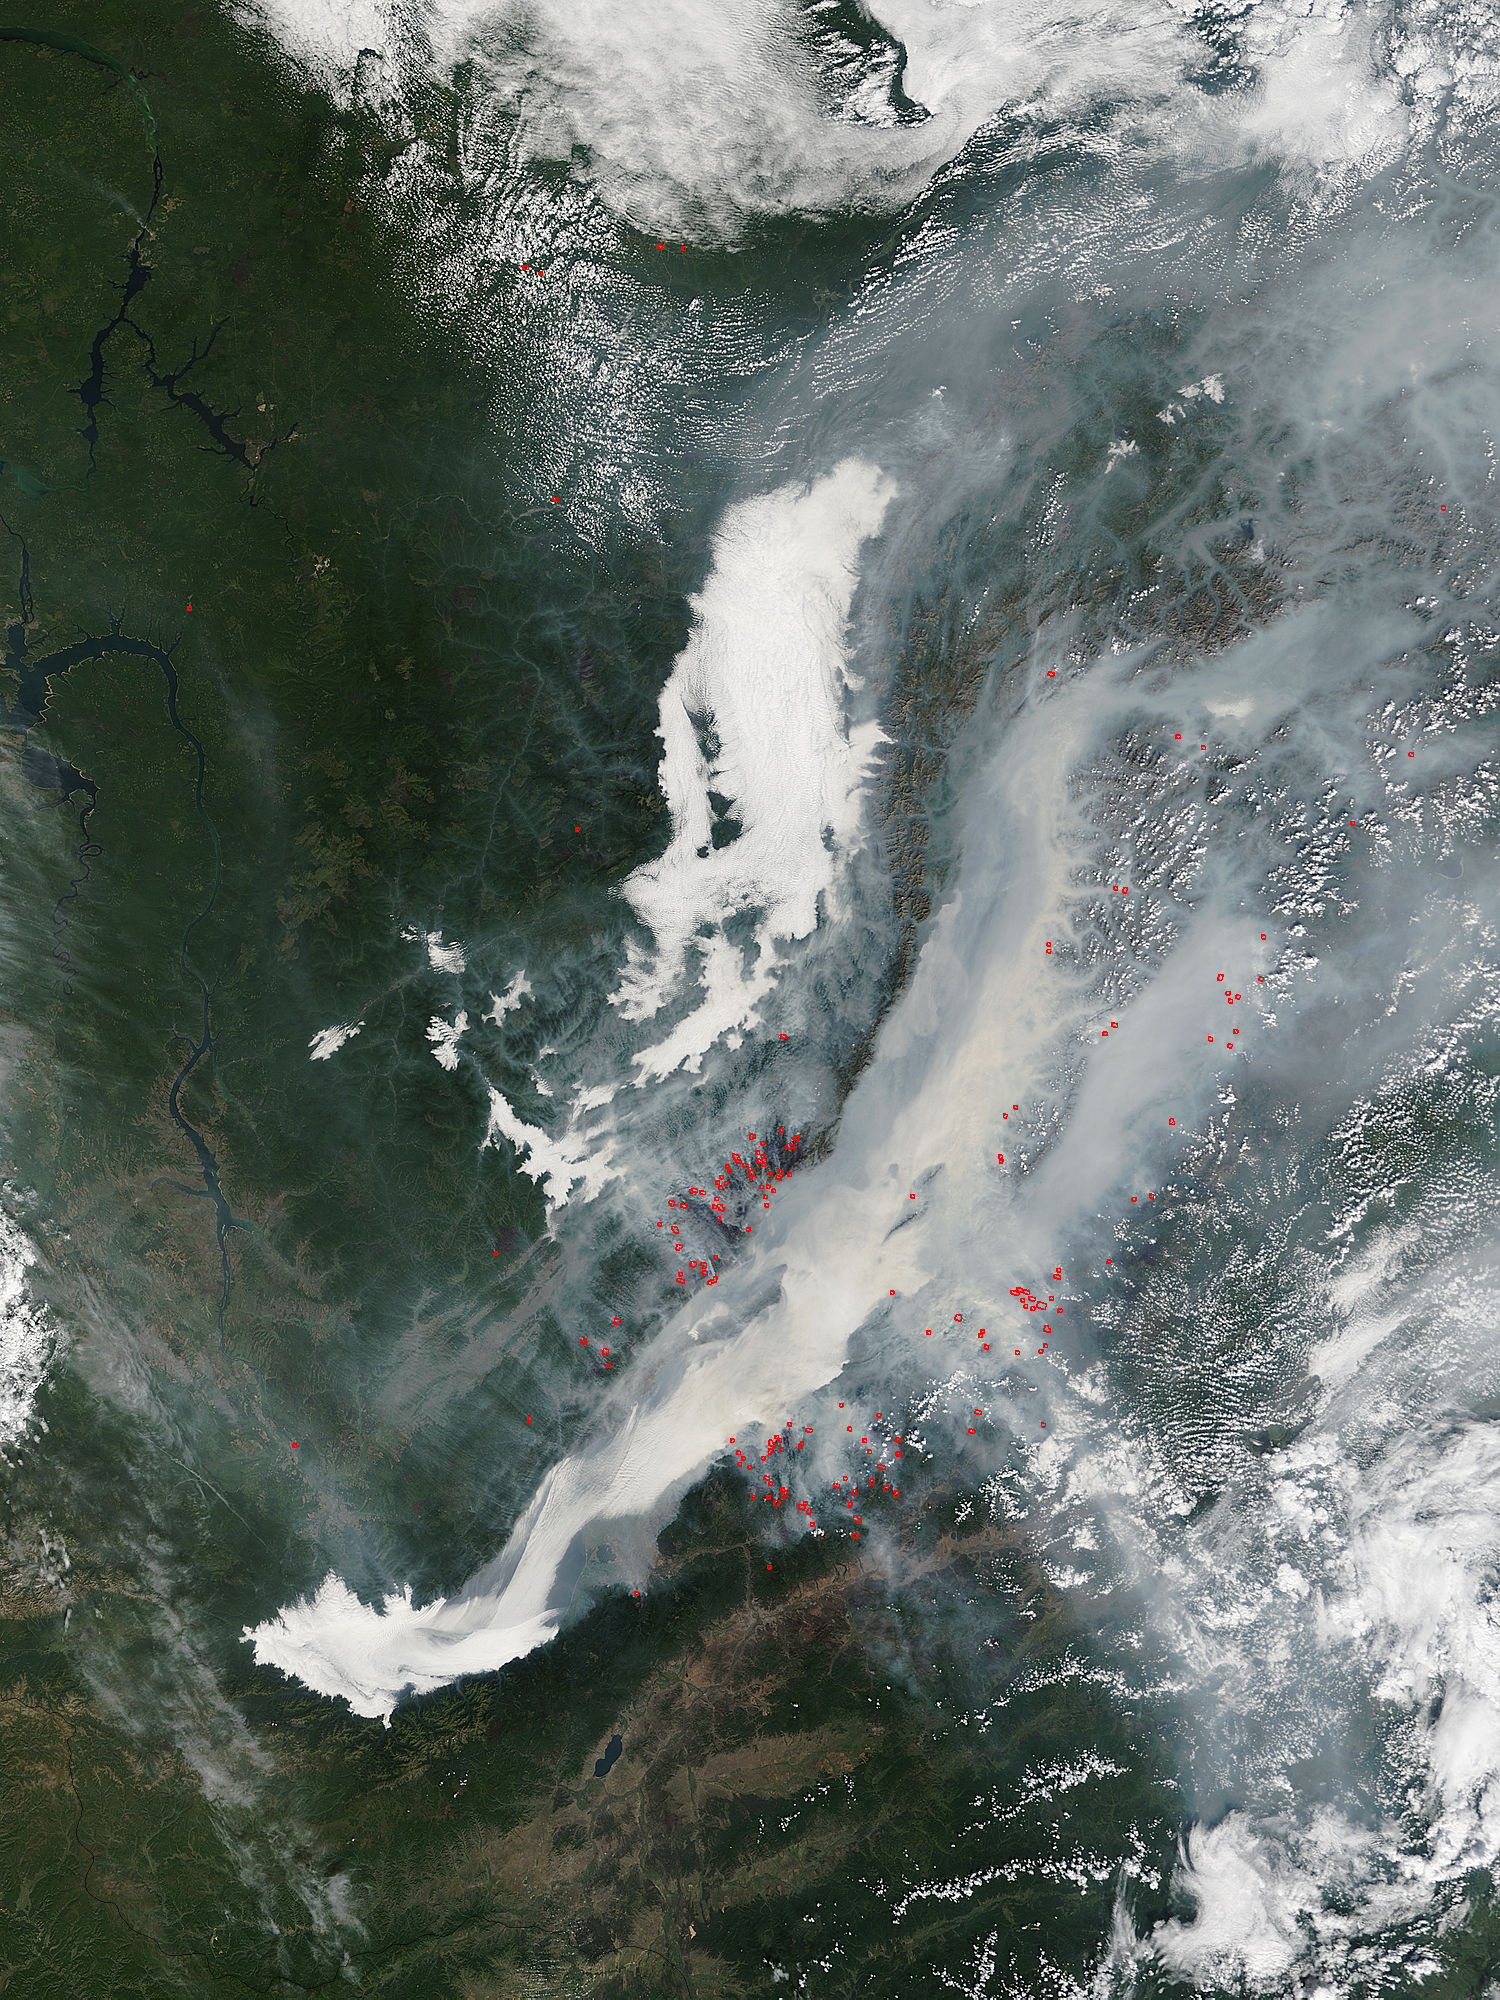 Fog, fires, and smoke near Lake Baikal, Russia - related image preview